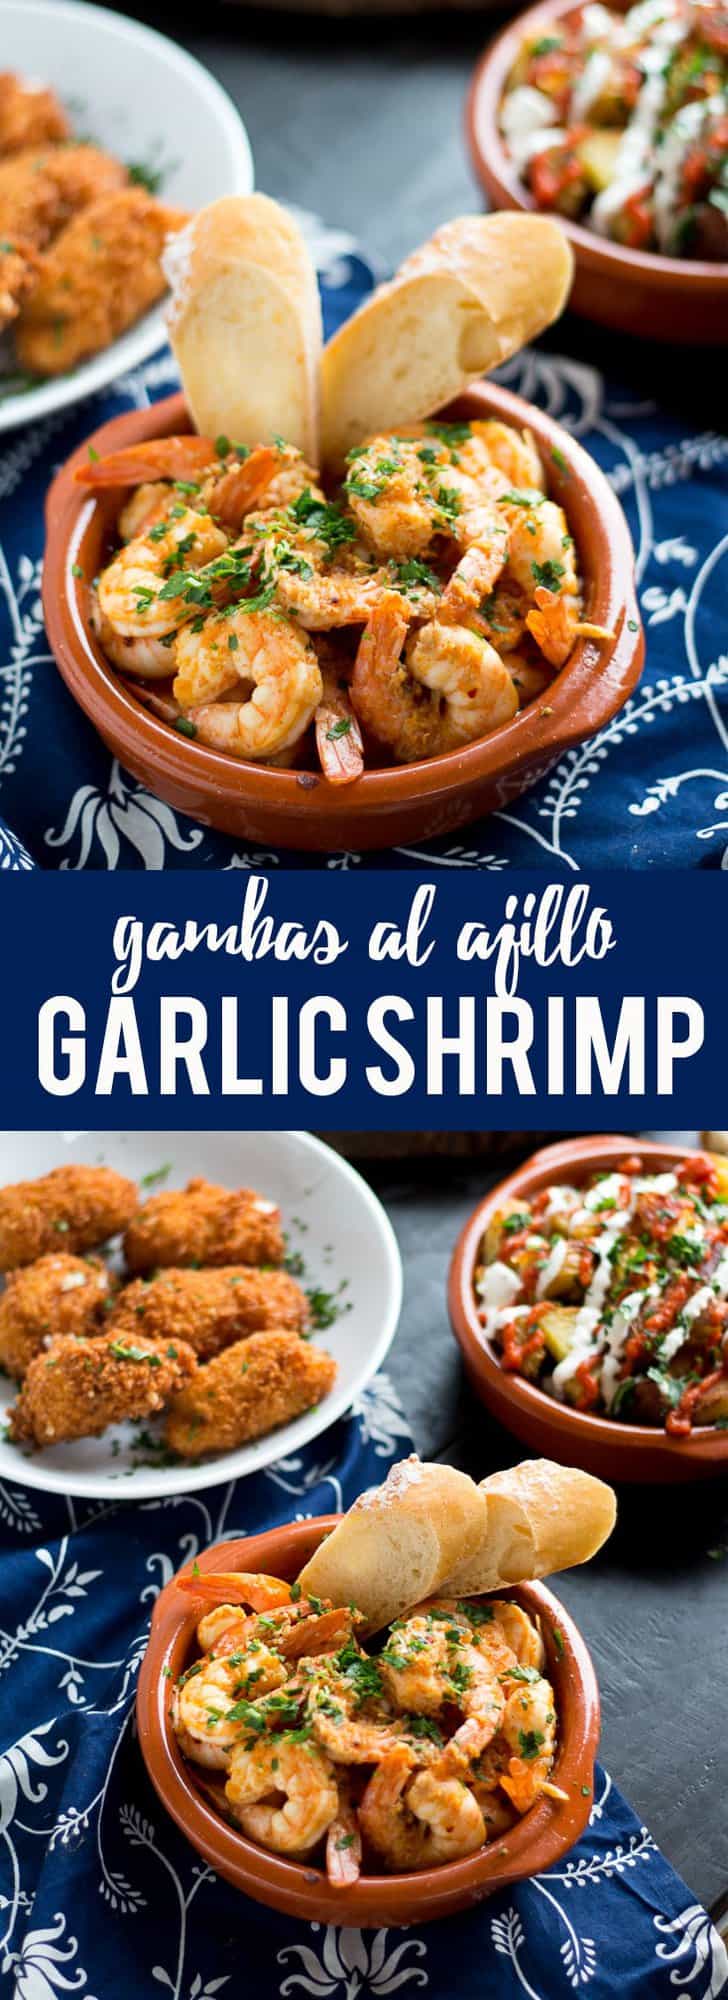 Garlic Shrimp (Gambas al Ajillo) are a classic Spanish tapas dish. Succulent shrimp in a spicy garlicky sauce that you will need to dip your bread into!